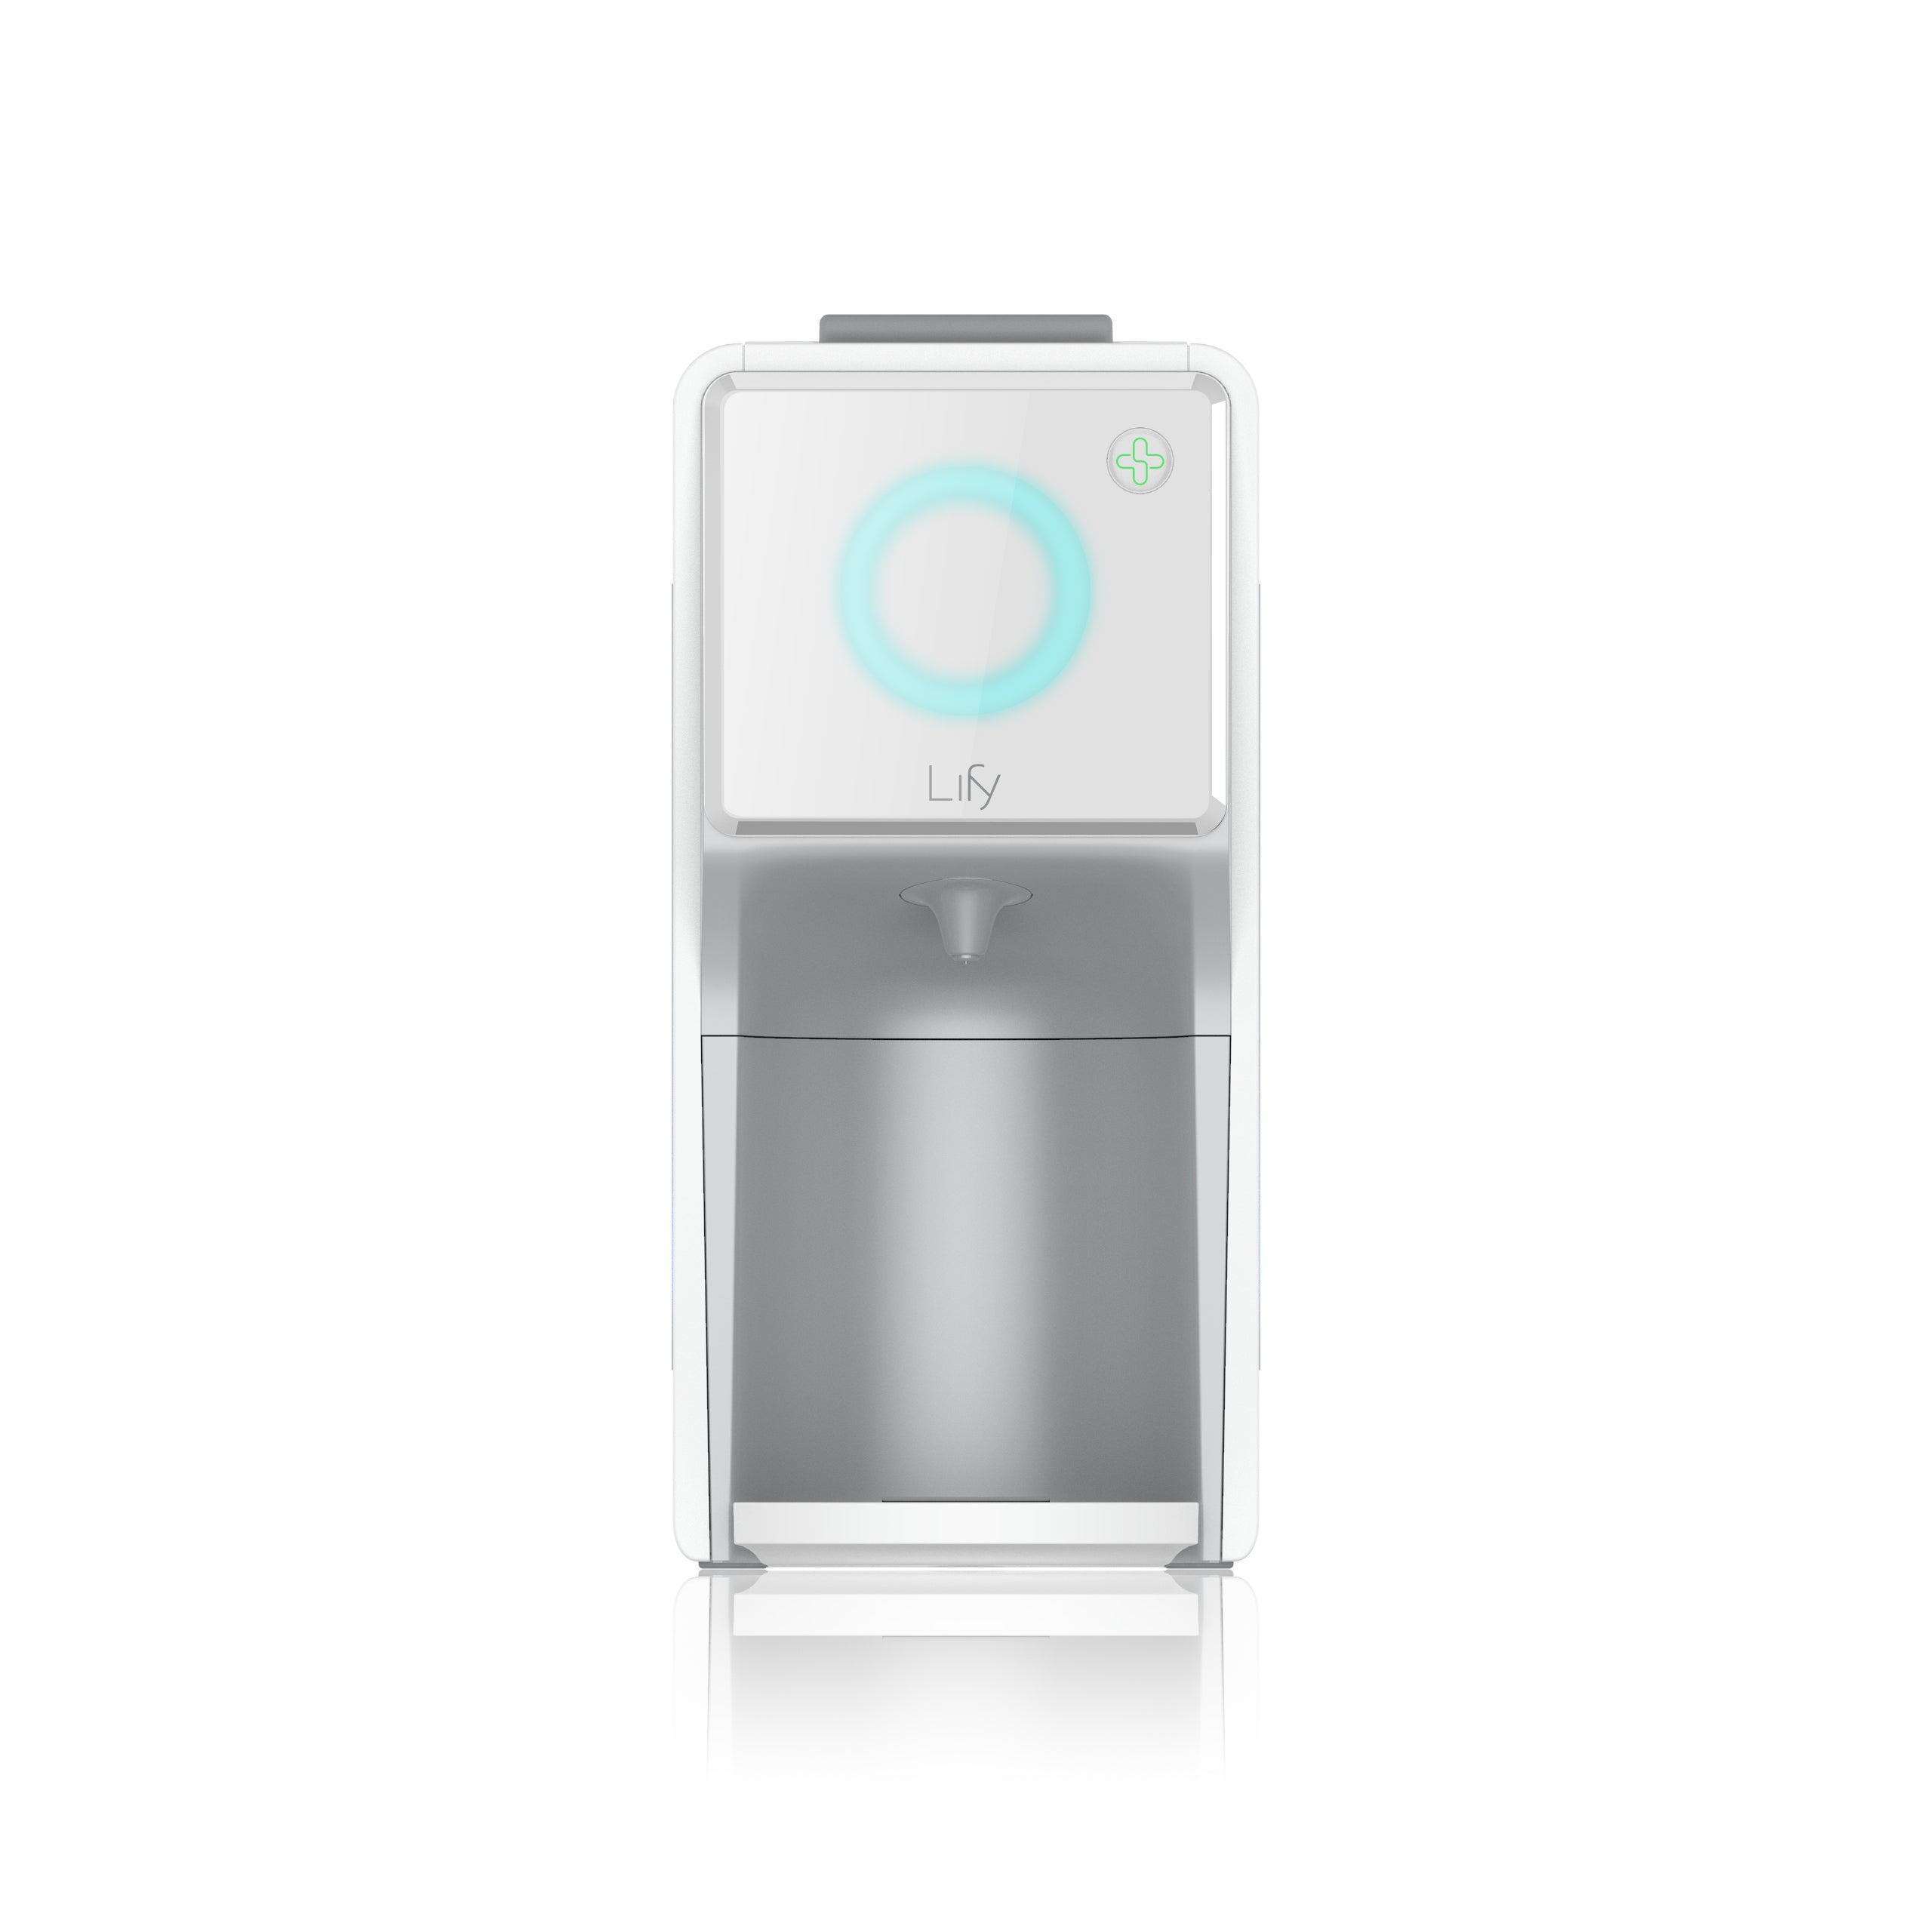 [Time-limited Offer] Lify Smart Herbal Brewer - Lify Wellness